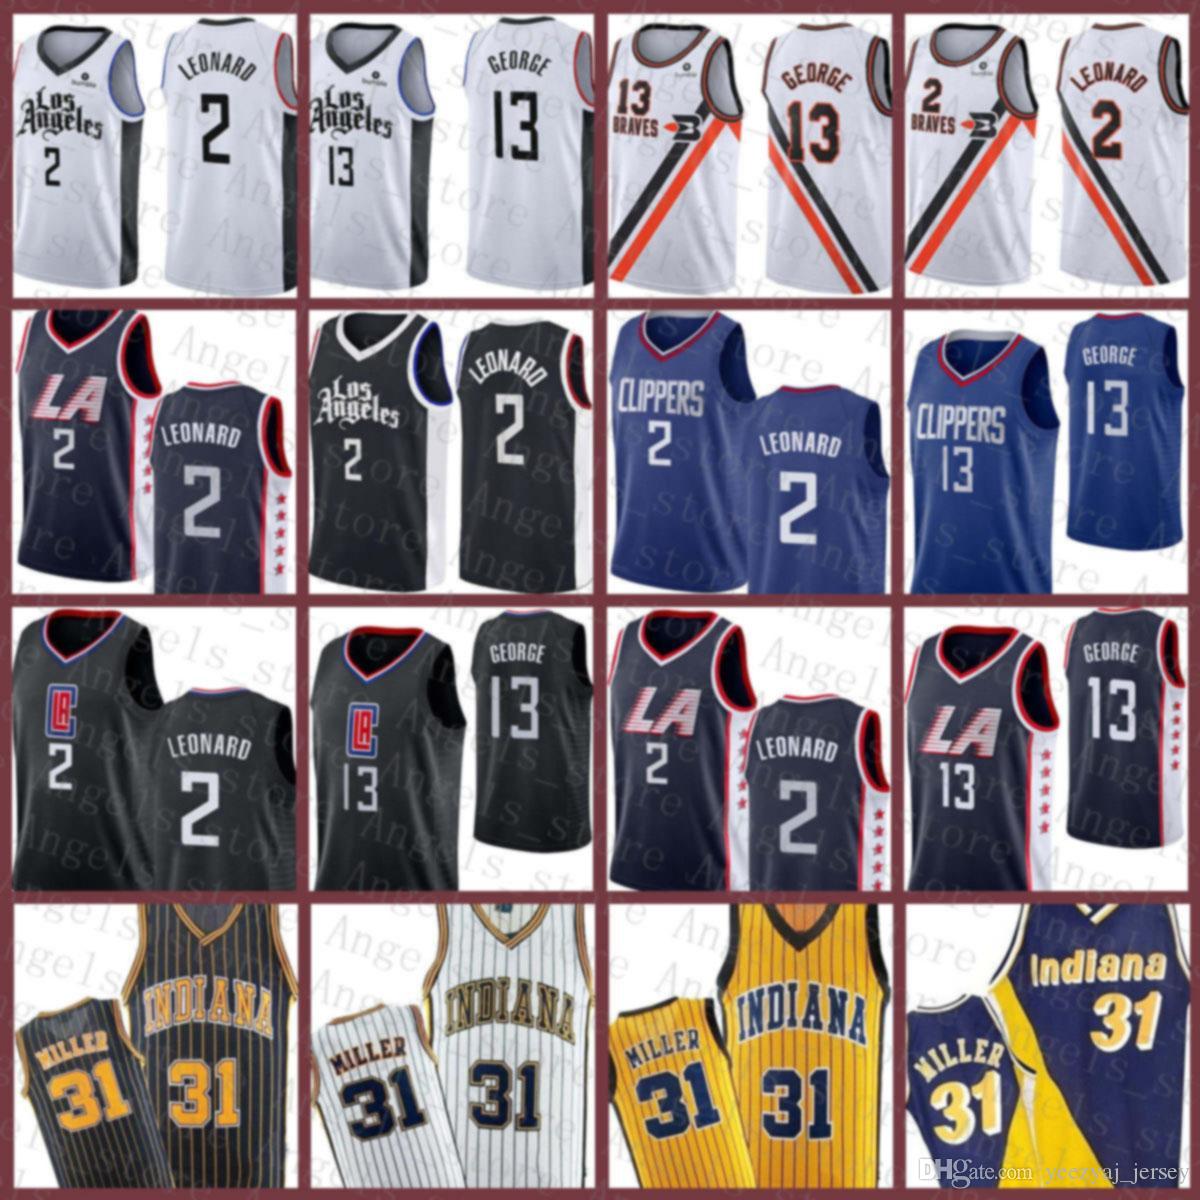 

Kawhi Paul 13 George 2 Leonard Reggie 31 Miller Indiana Pacers Los Angeles Clippers Victor 4 Oladipo Basketball Jersey Clipper, Jersey-kuaichuan